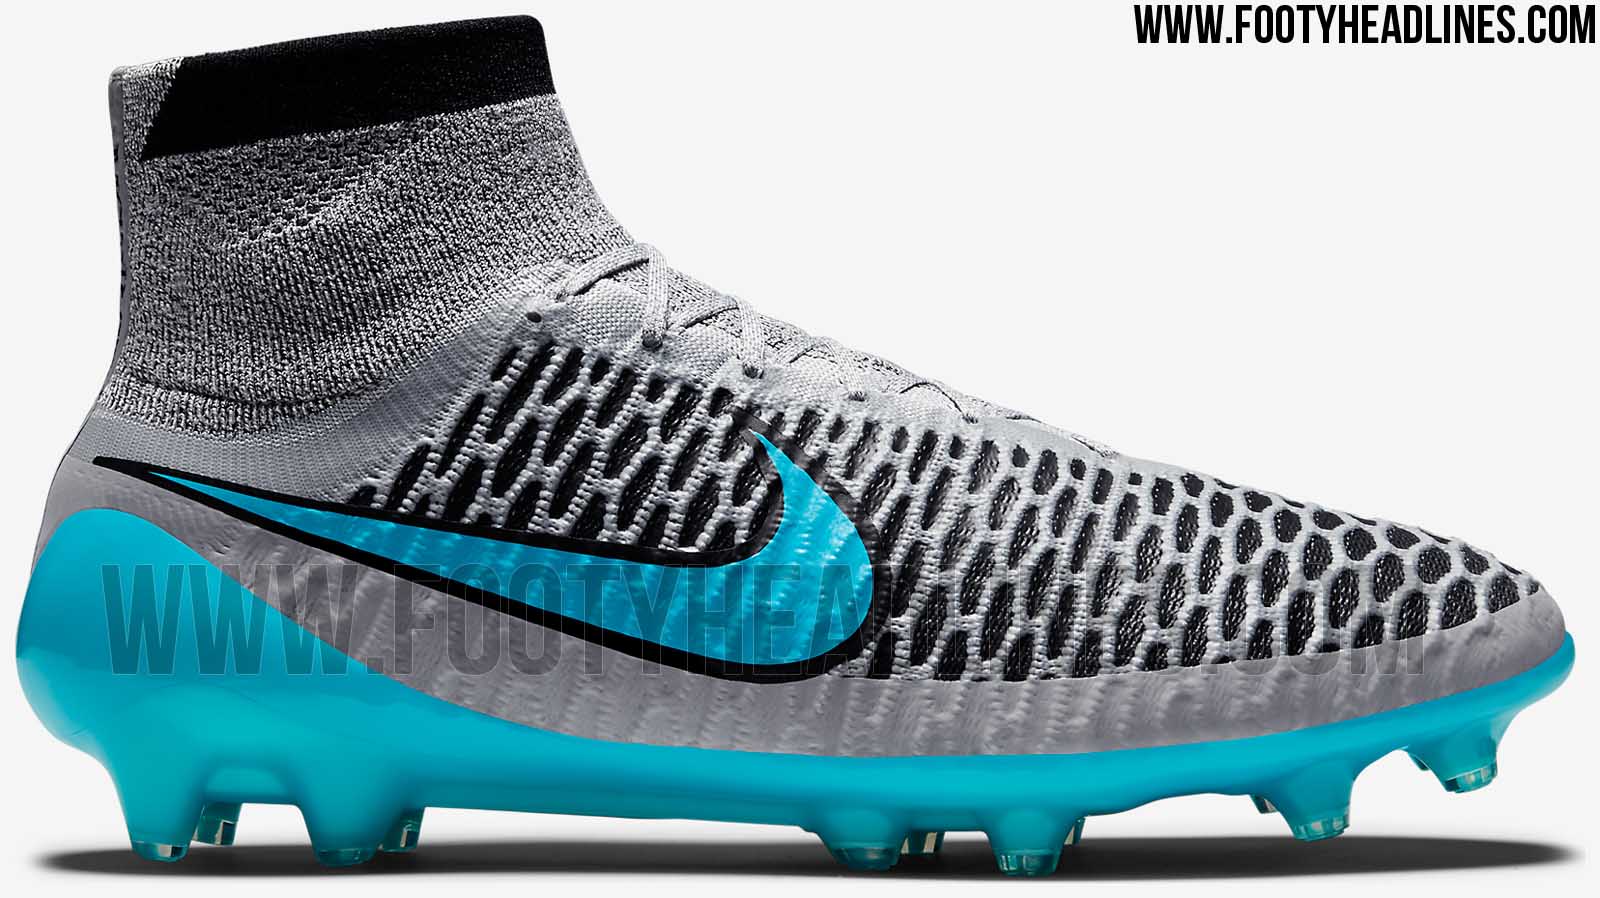 Silver Nike Magista 2015-2016 Boots Released - Footy Headlines